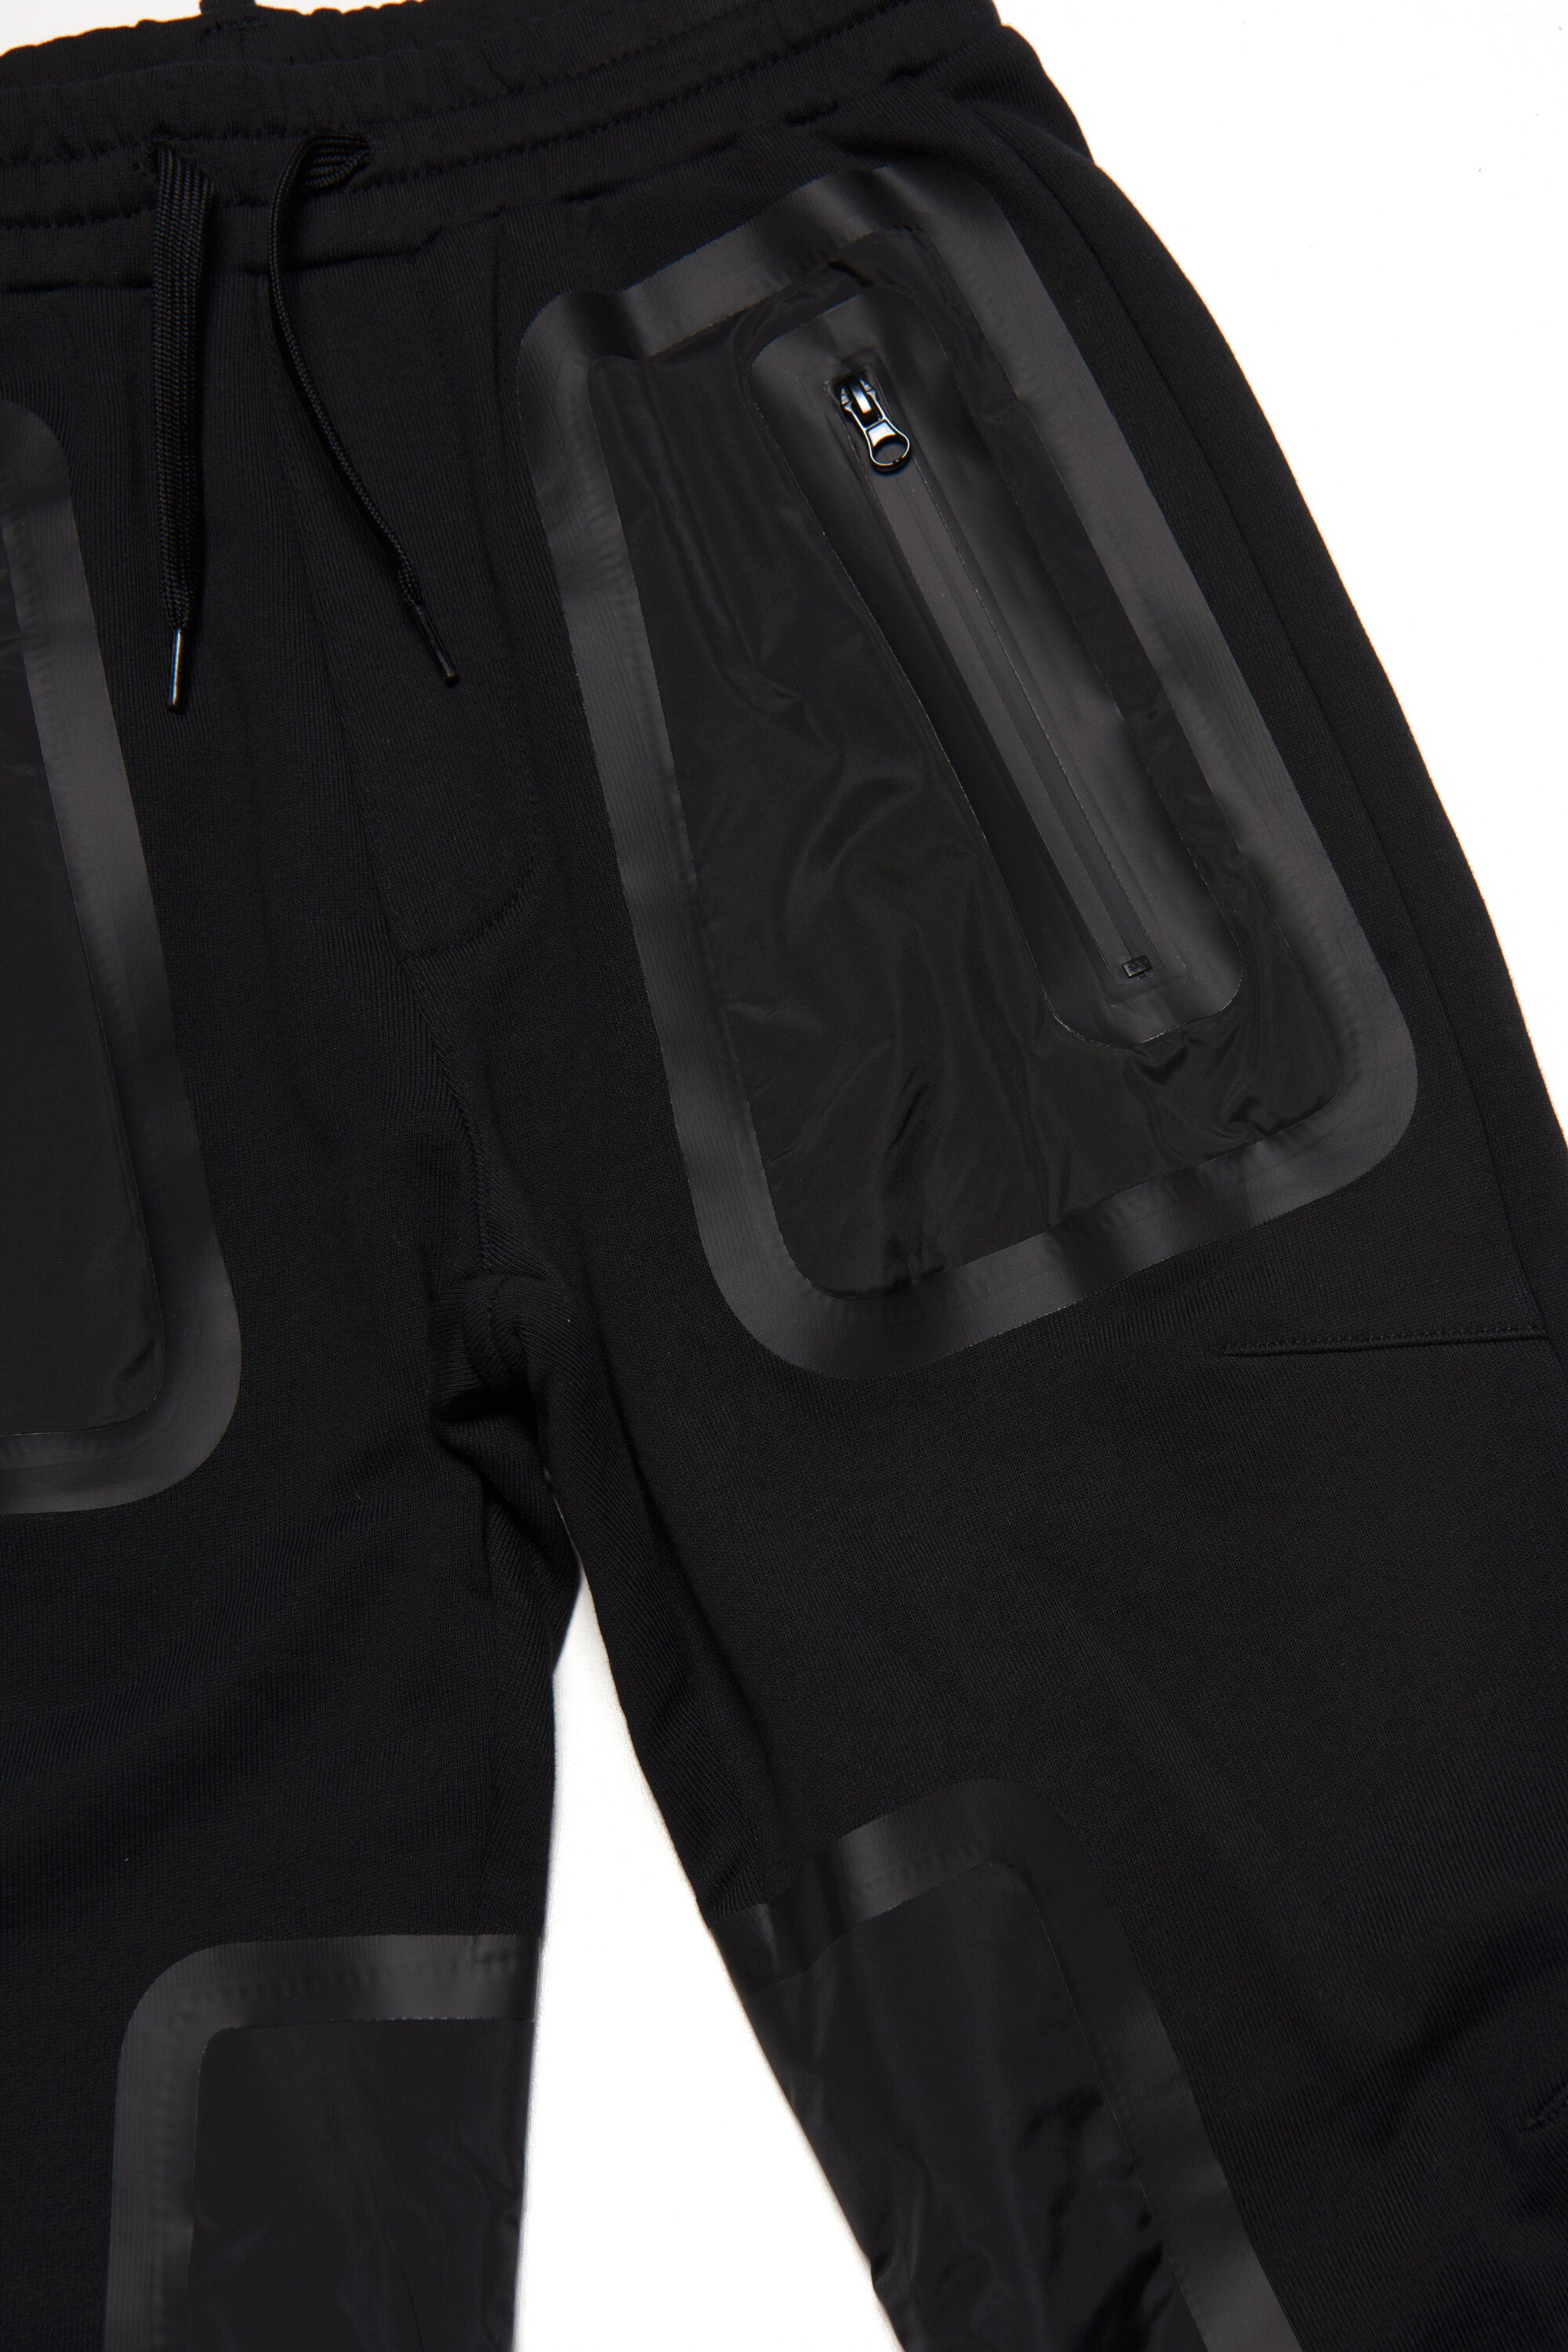 Jogger pants in fleece with heat-sealed inserts